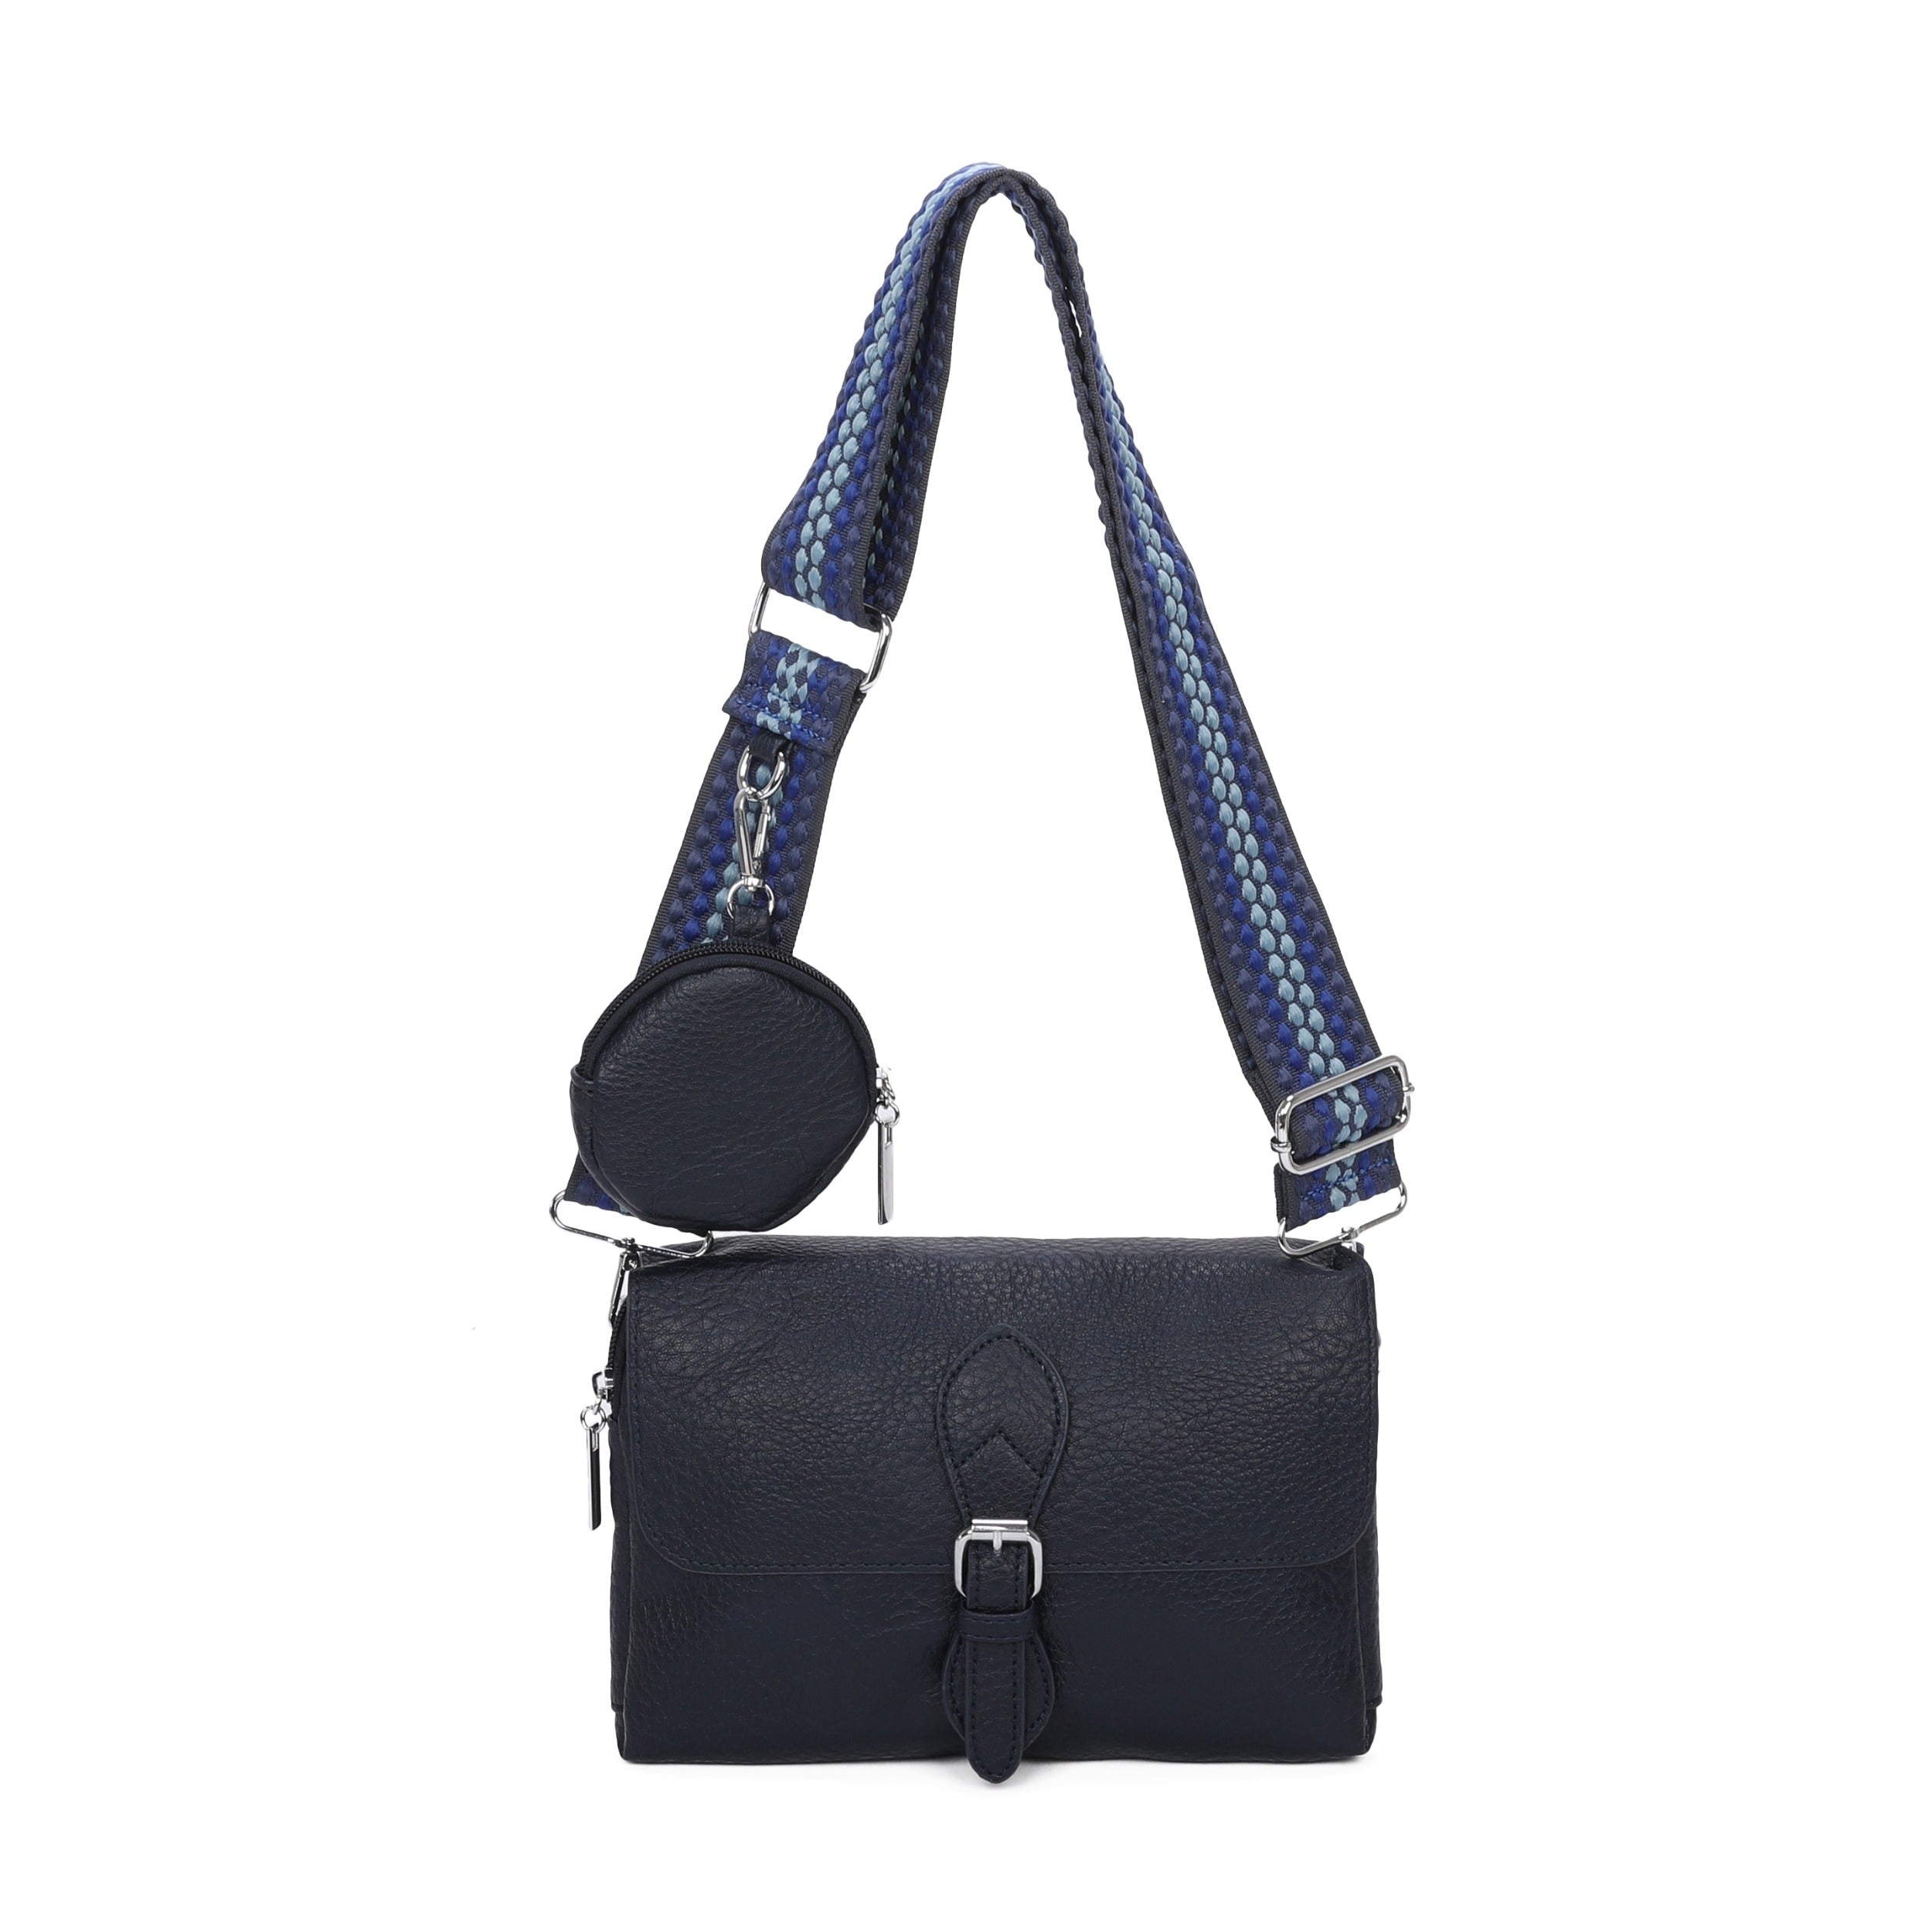 Craze London Crossbody Bag with Double Zipped Compartments